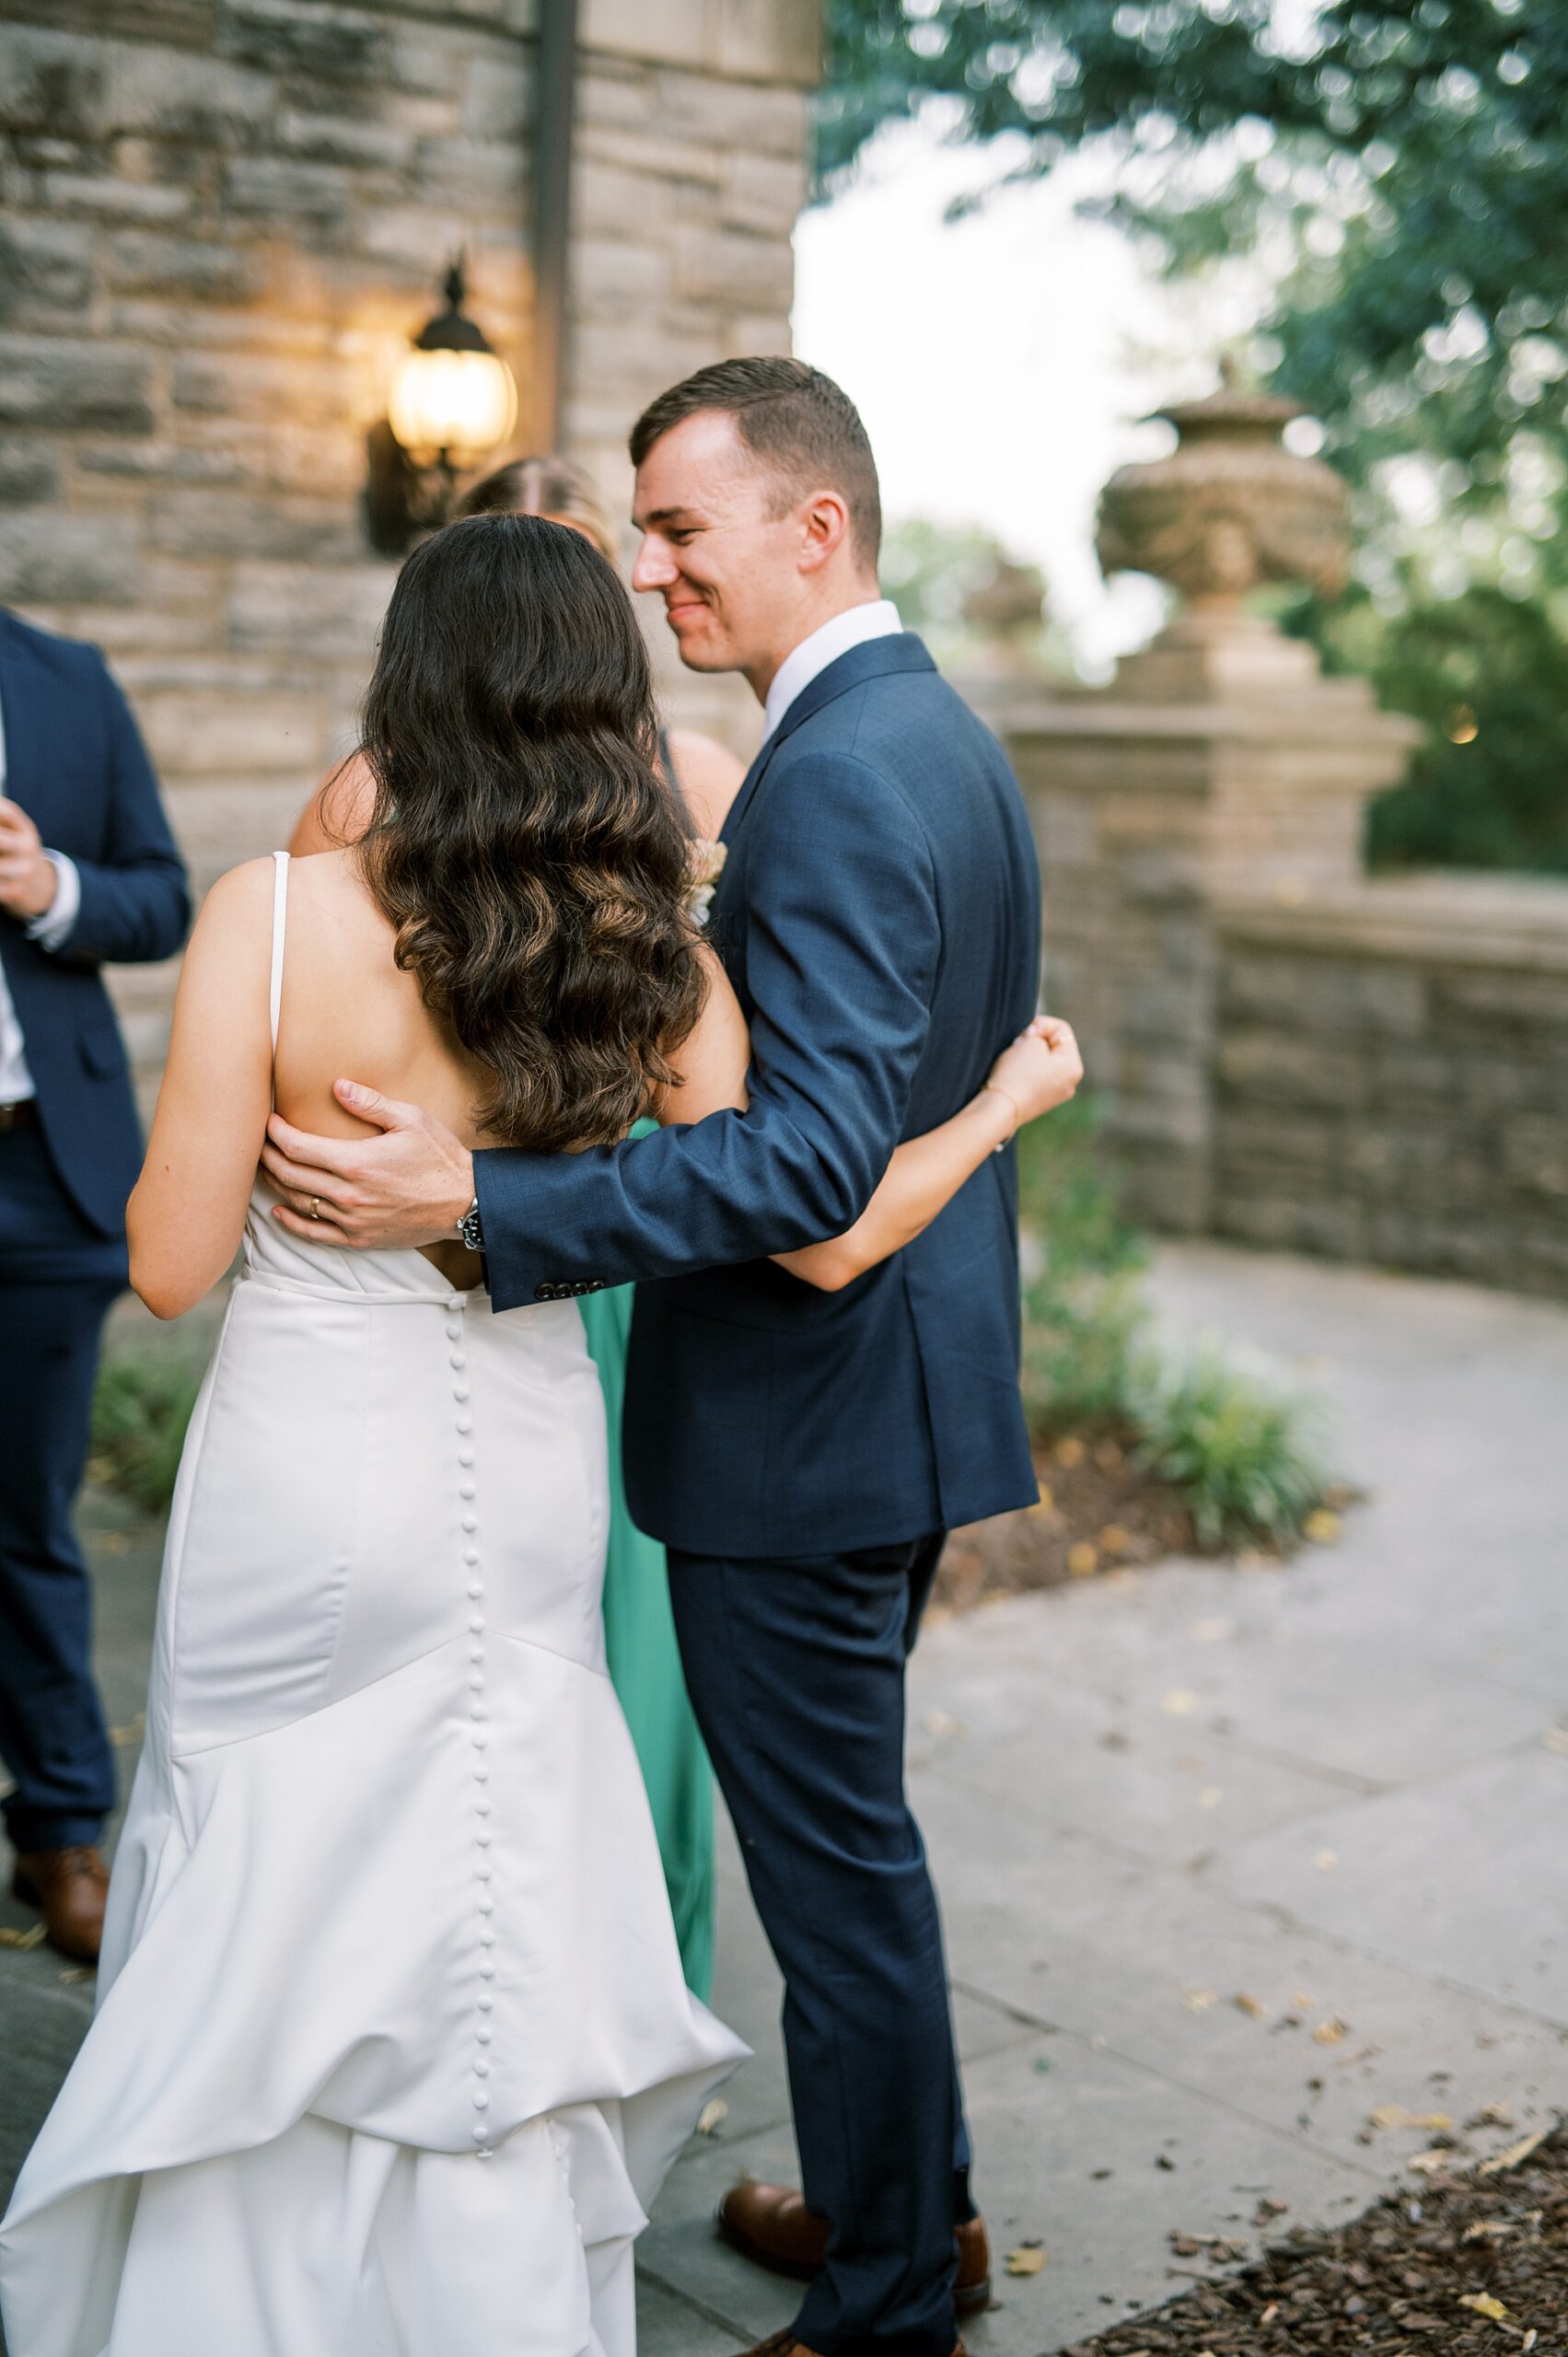 newlyweds at cocktail hour from Intimate Wedding at Cheekwood Estate and Gardens